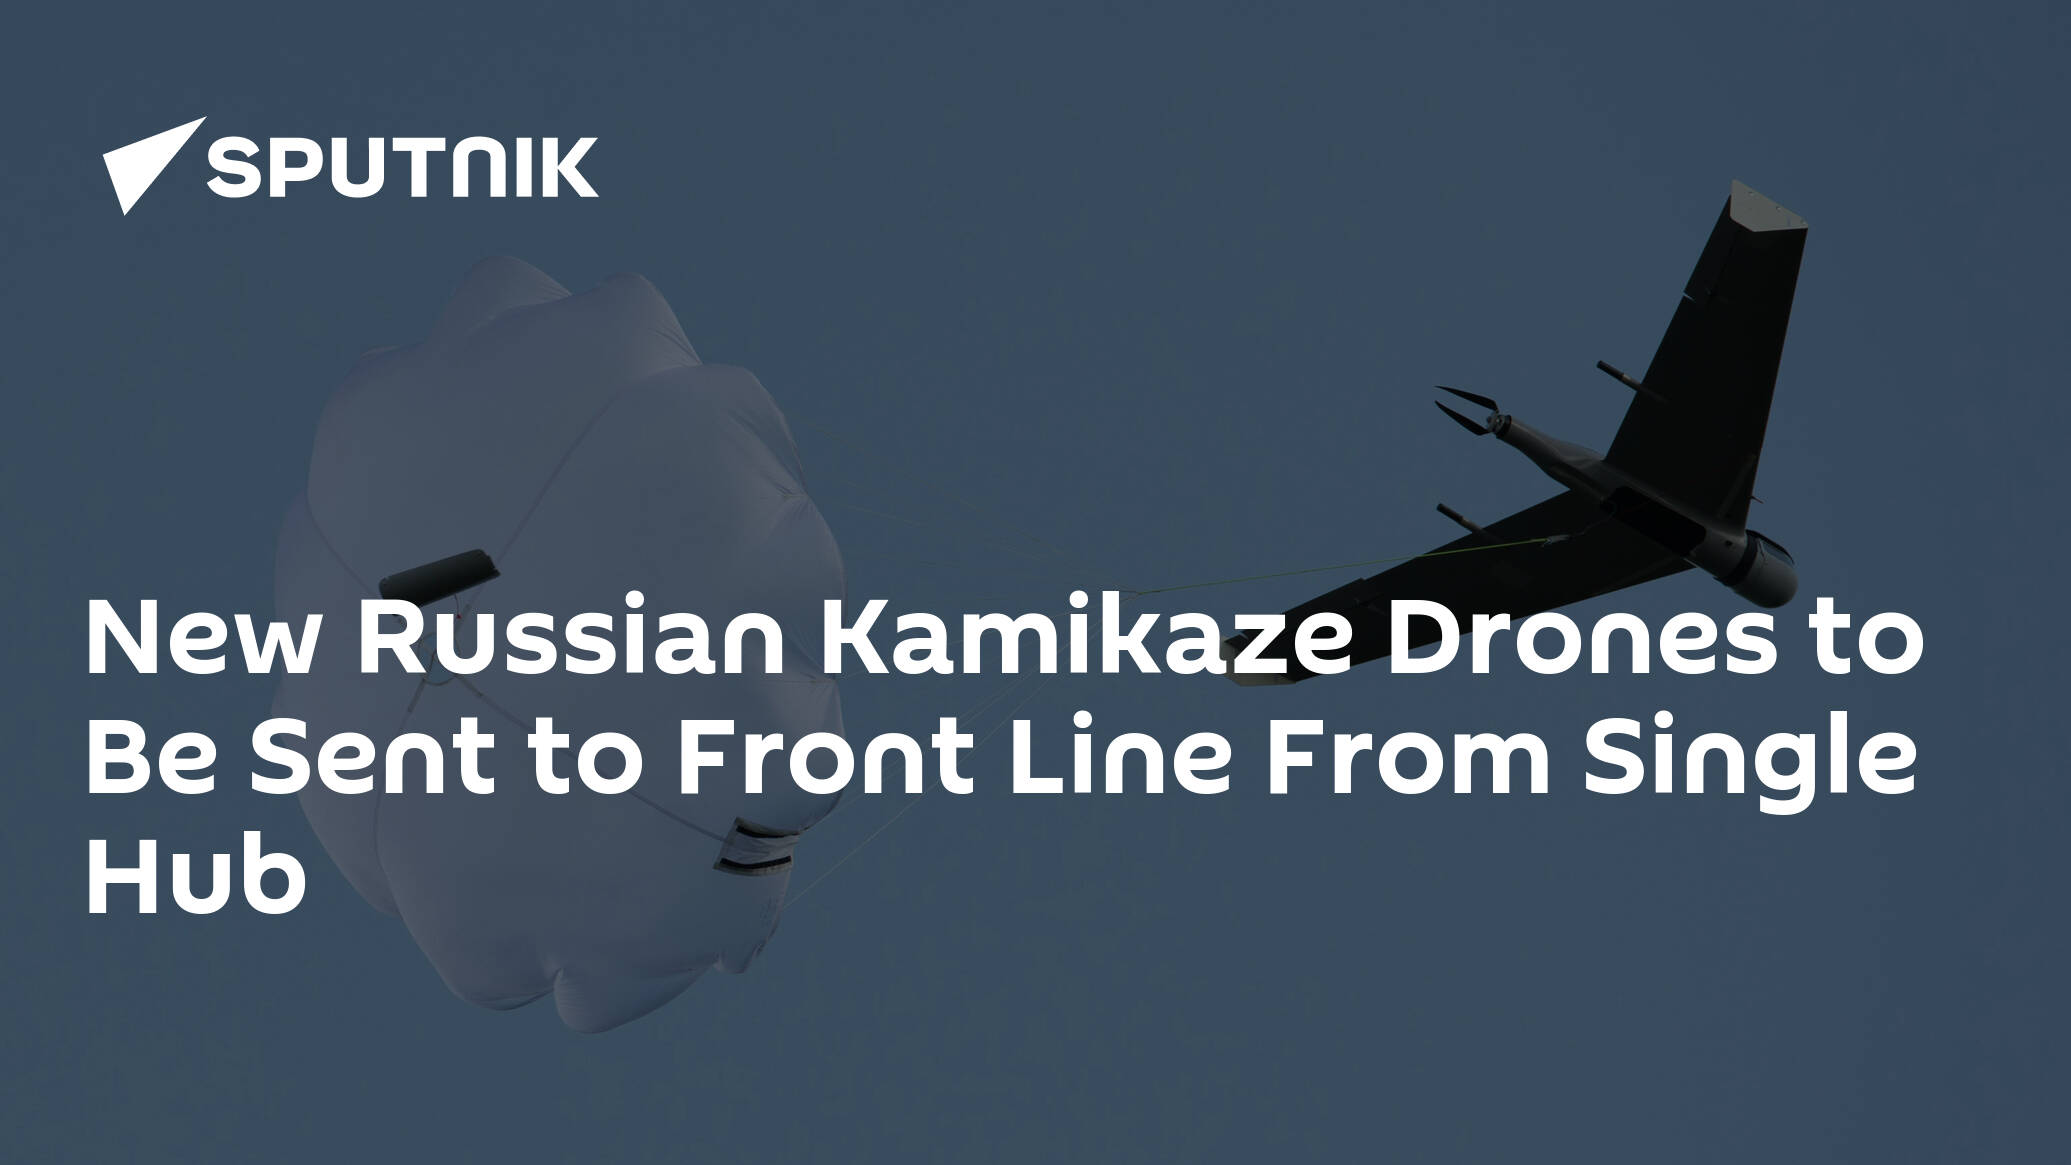 New Russian Kamikaze Drones to Be Sent to Front Line From Single Hub